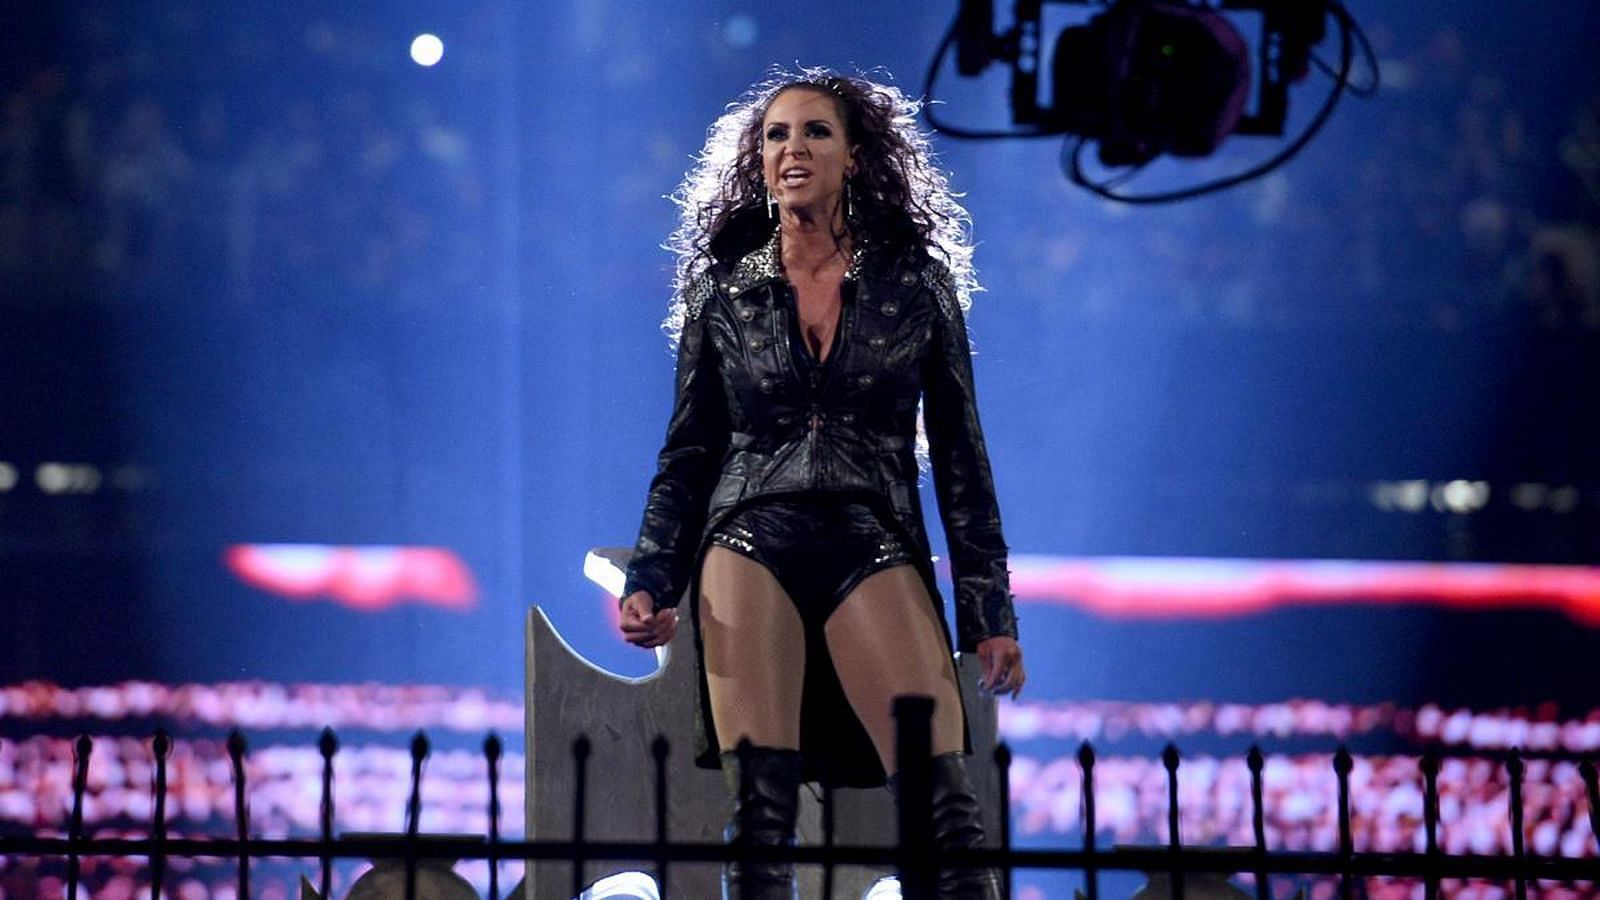 Stephanie McMahon walked into WrestleMania 32 not knowing what Roman Reigns would do